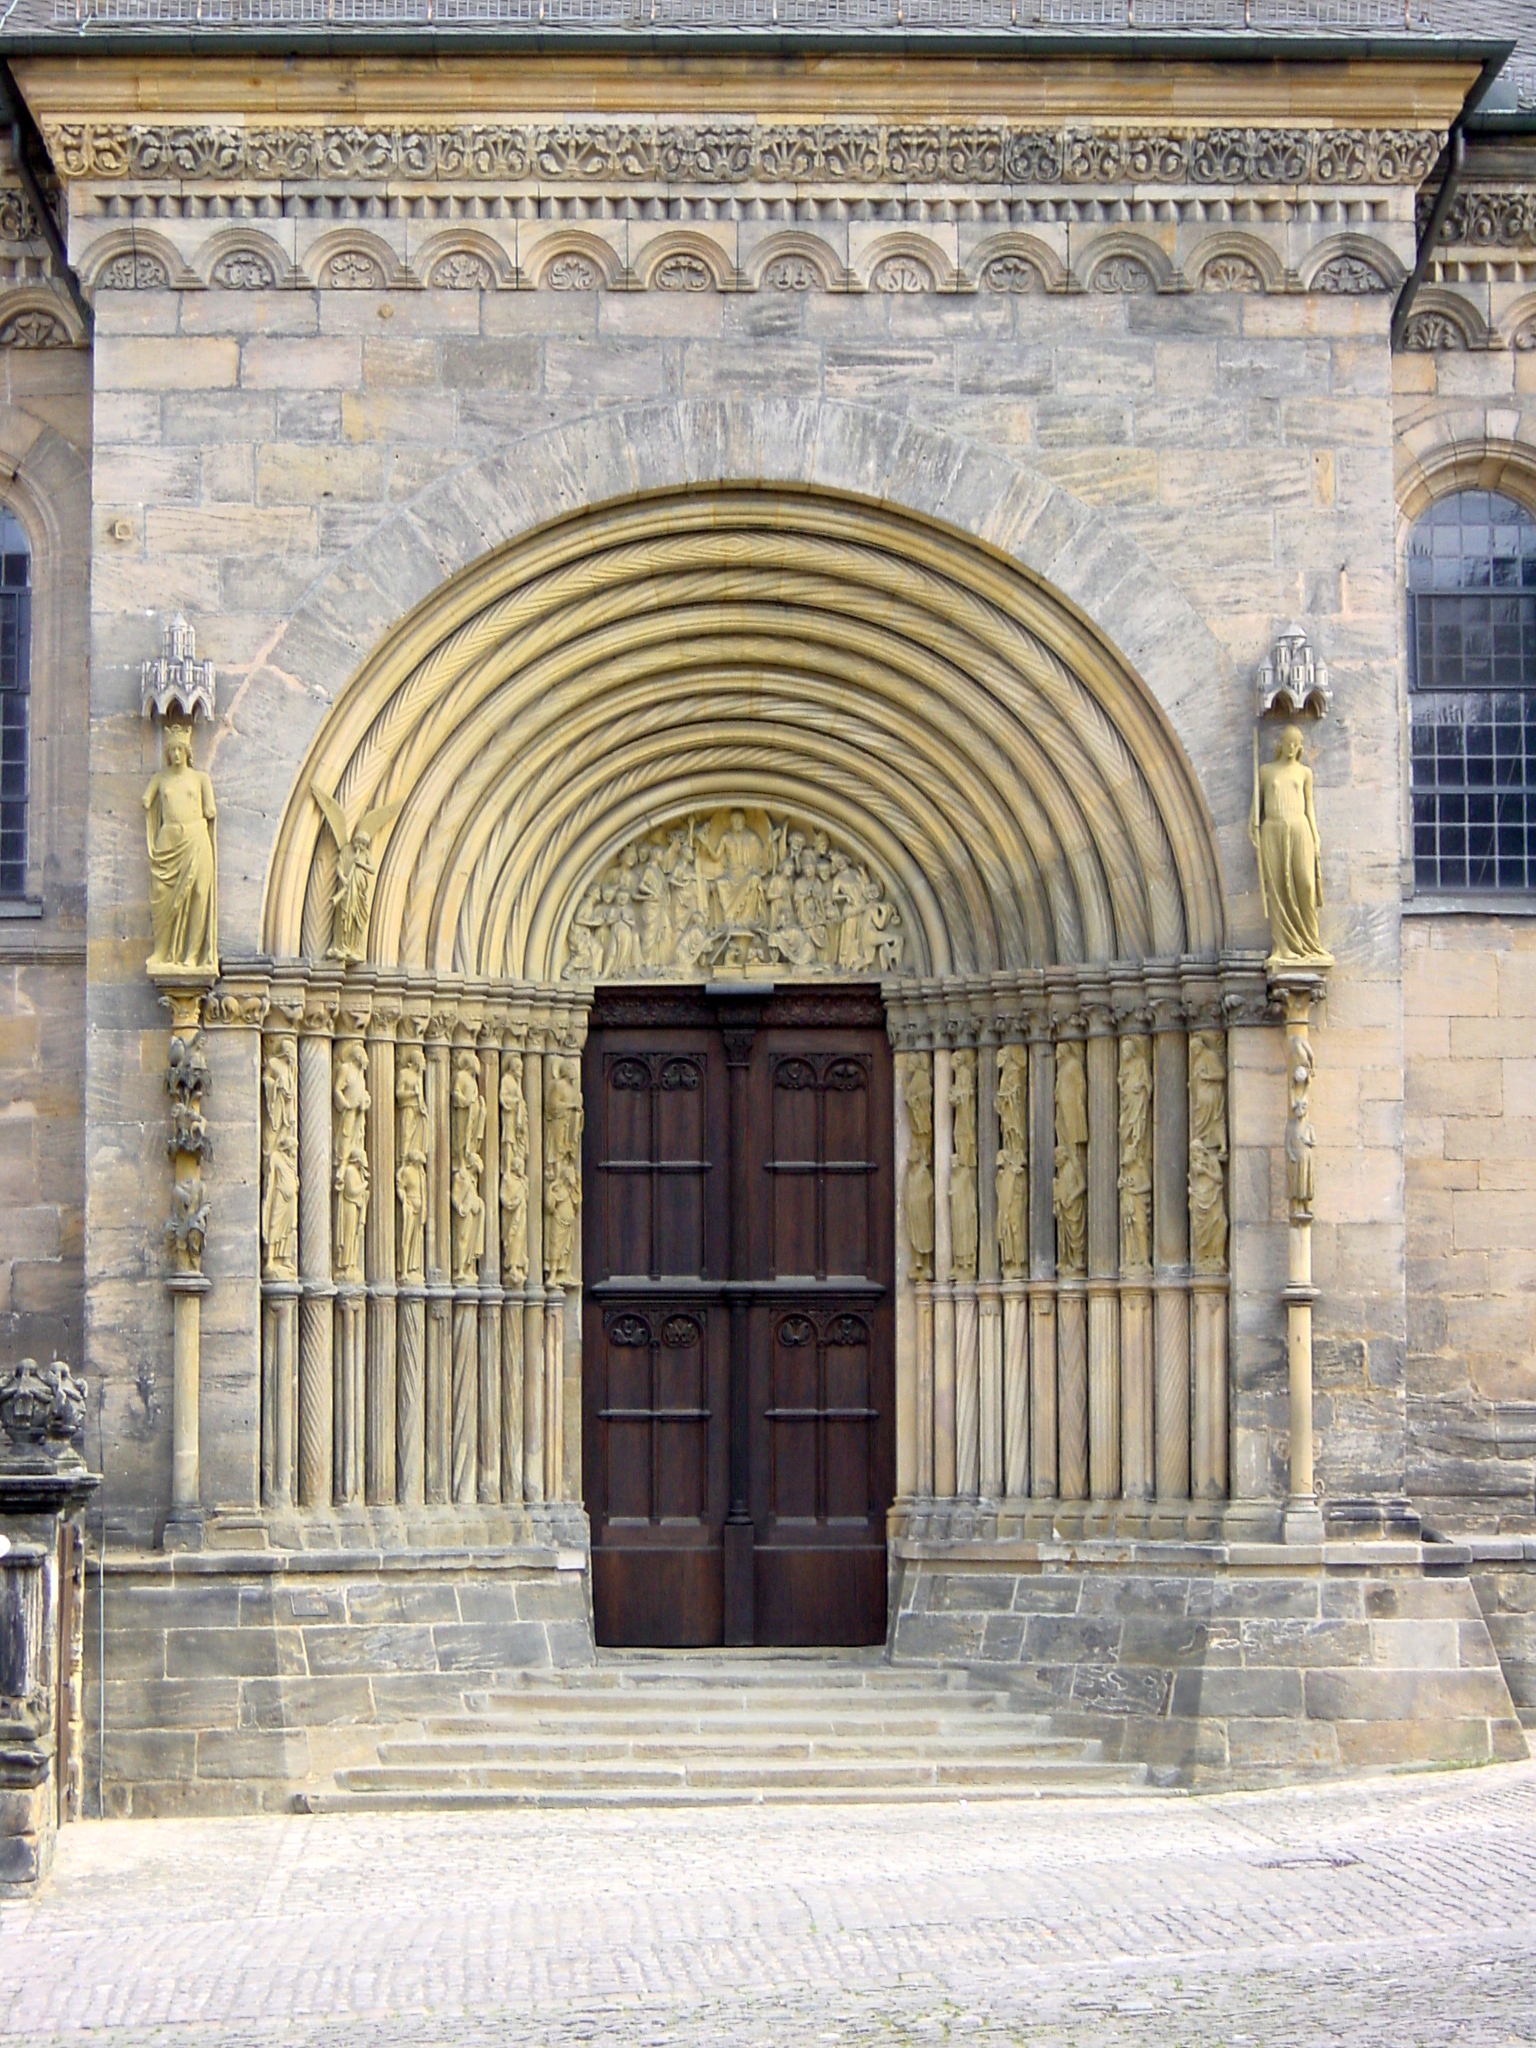 an arched doorway with carvings in the stone wall